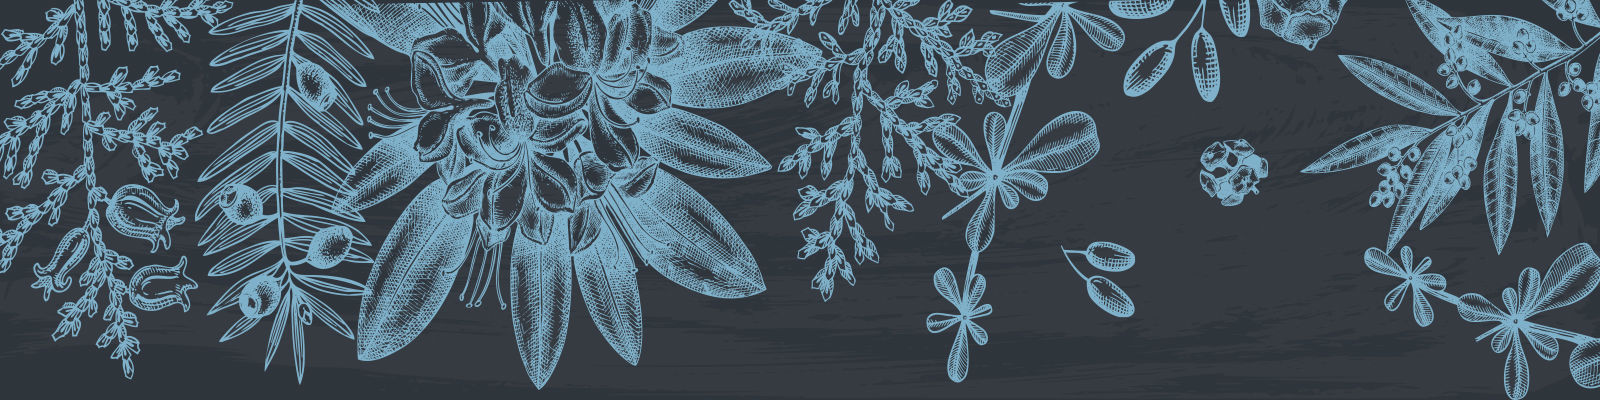 Light blue botanical design against a dark background to represent reflection, healing and unity.